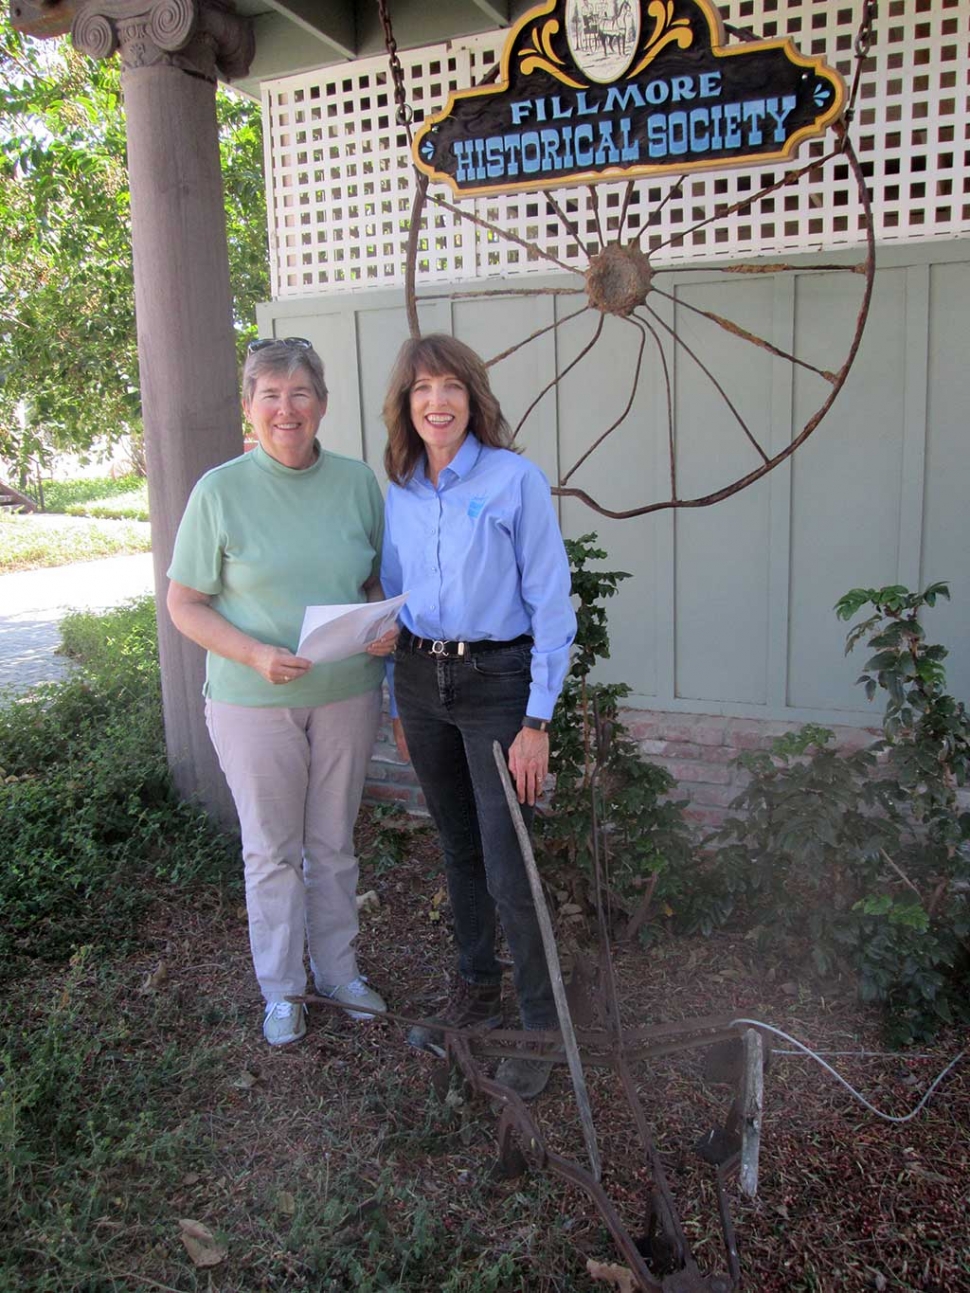 On October 6, 2015,  the Fillmore Historical Museum was pleased to accept a donation of $3,000.00 from Leslie Klinchuch representing Chevron Corporation.   The donation will be used for the ongoing projects and programs of the Museum.  The Museum currently has displays and photos representing the individuals and operations of the old Fillmore Texaco Refinery from the beginnings through WW II to its dismantling in  1951 and its final end in 2004.  The site was home for years to many of  the oil company employees and their children. The photo was taken in front of the Museum sign which is enhanced by an old wagon wheel from the turn of the last century rescued from a trash dump at the site.  
